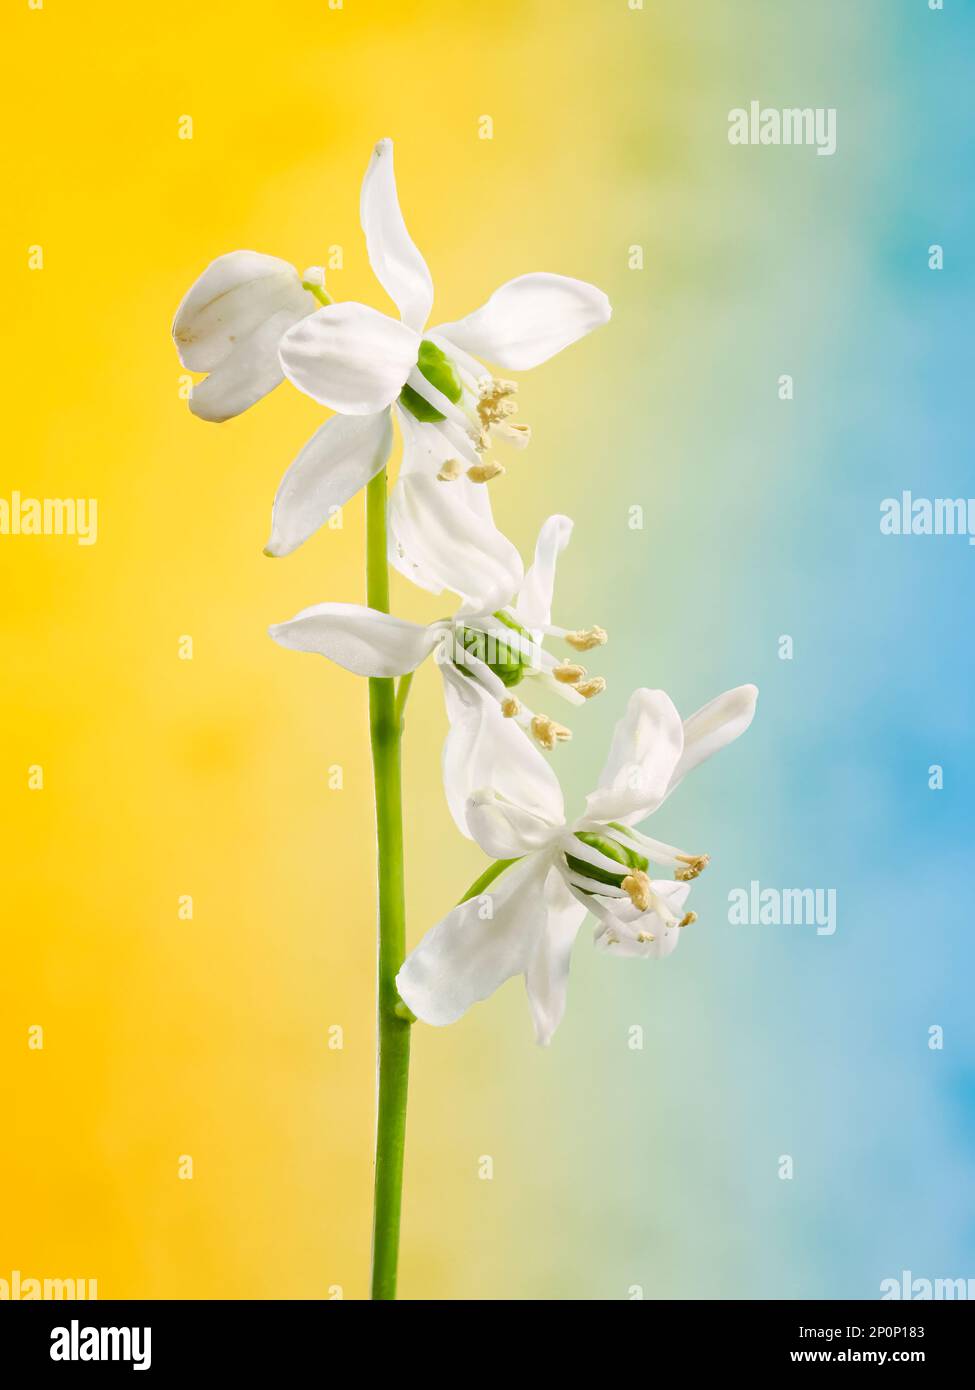 Three Snowdrop flowers, (Galanthus nivalis), on a single stem, photographed against a colourful background Stock Photo